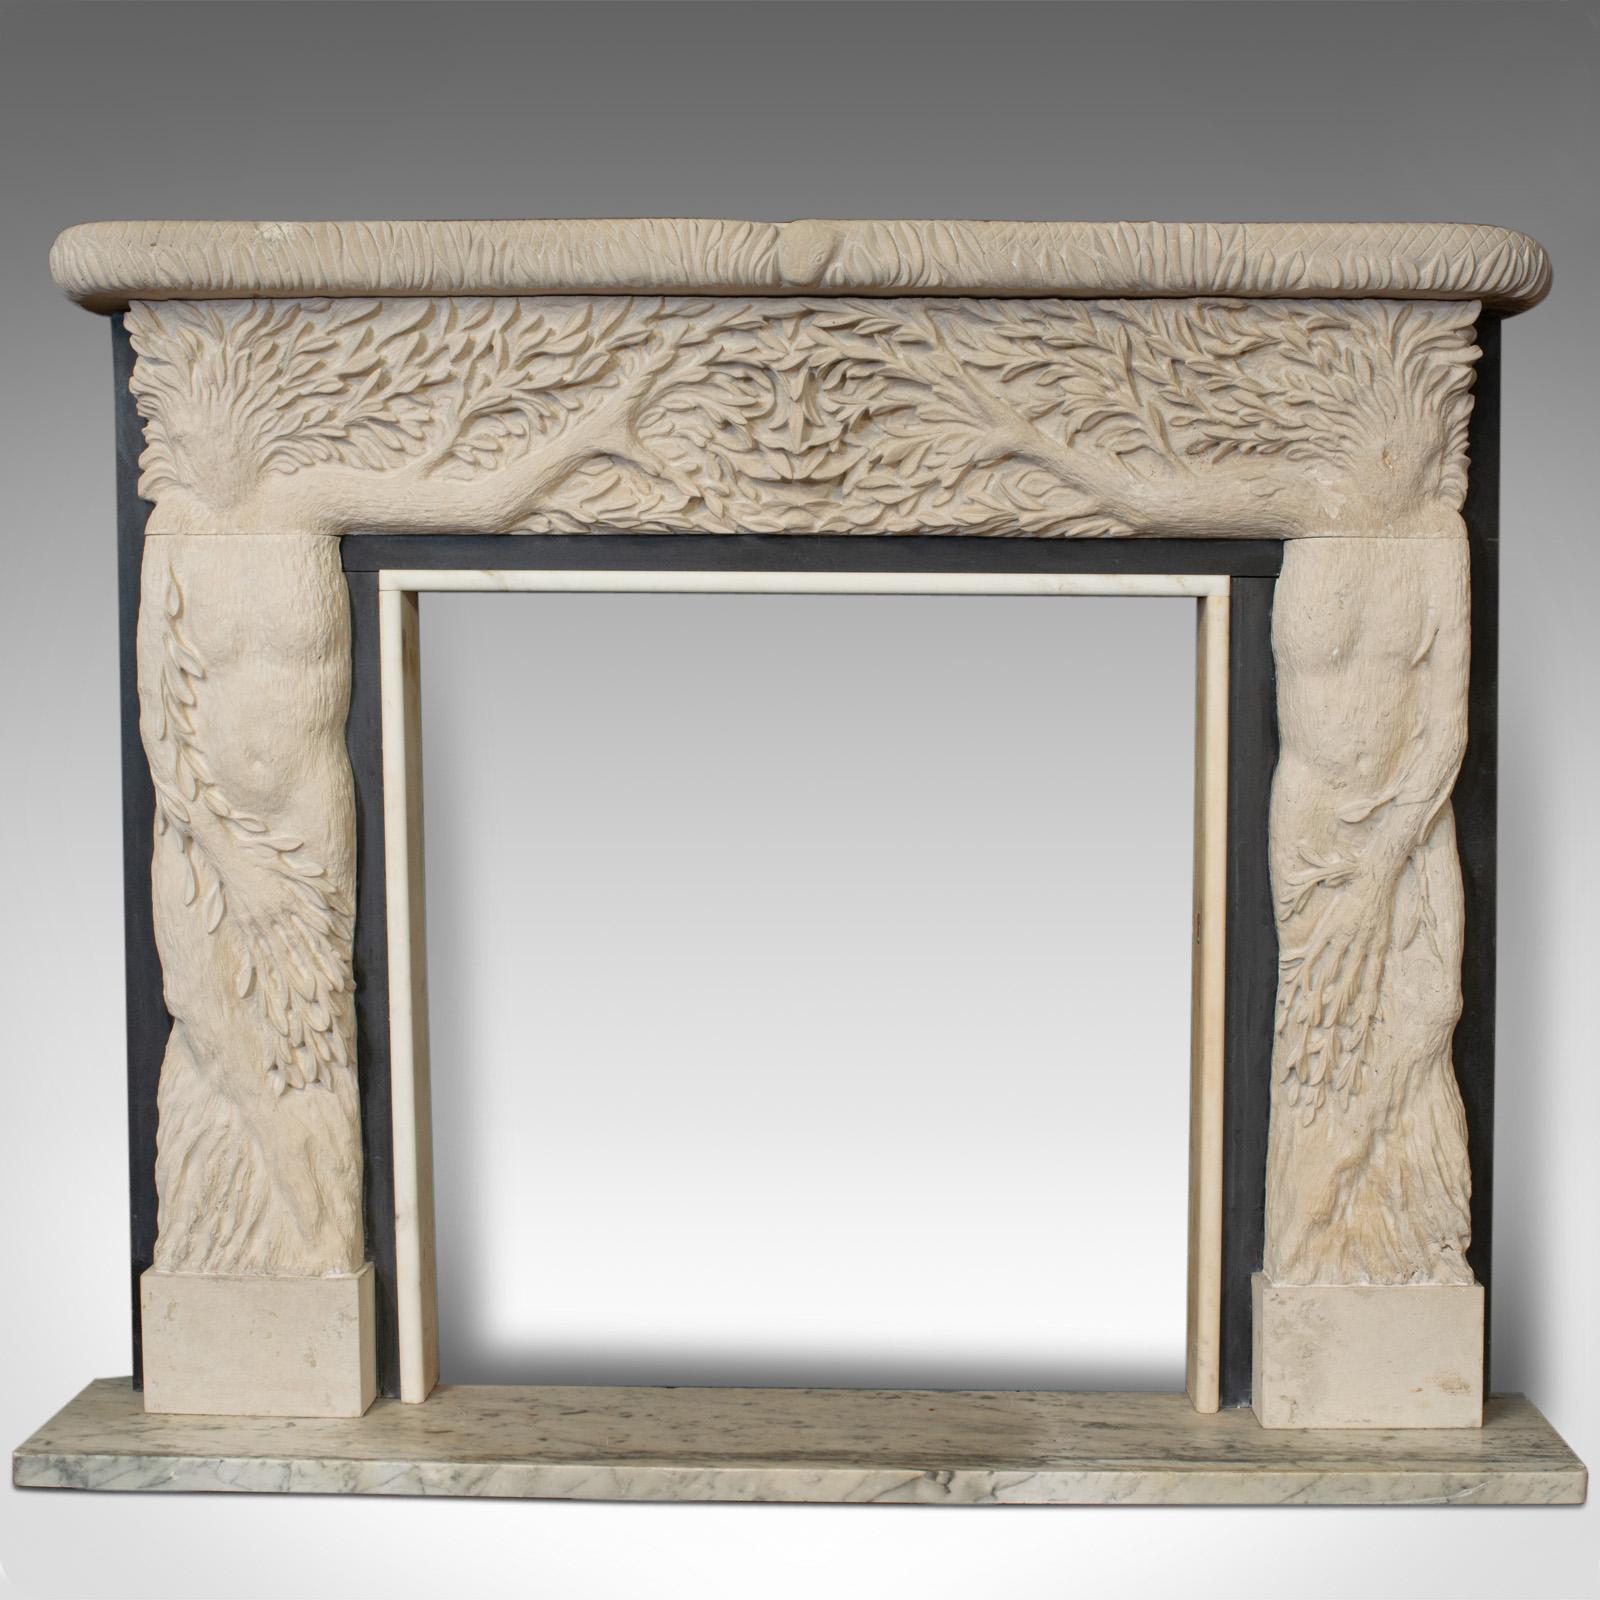 'Ladies of the Forest' is a decorative fire surround and mantelpiece. An English, Portland stone and statuary slate fireplace dating to the 20th century and by renowned sculptural artist Dominic Hurley.

One-of-a-kind decorative fire surround of